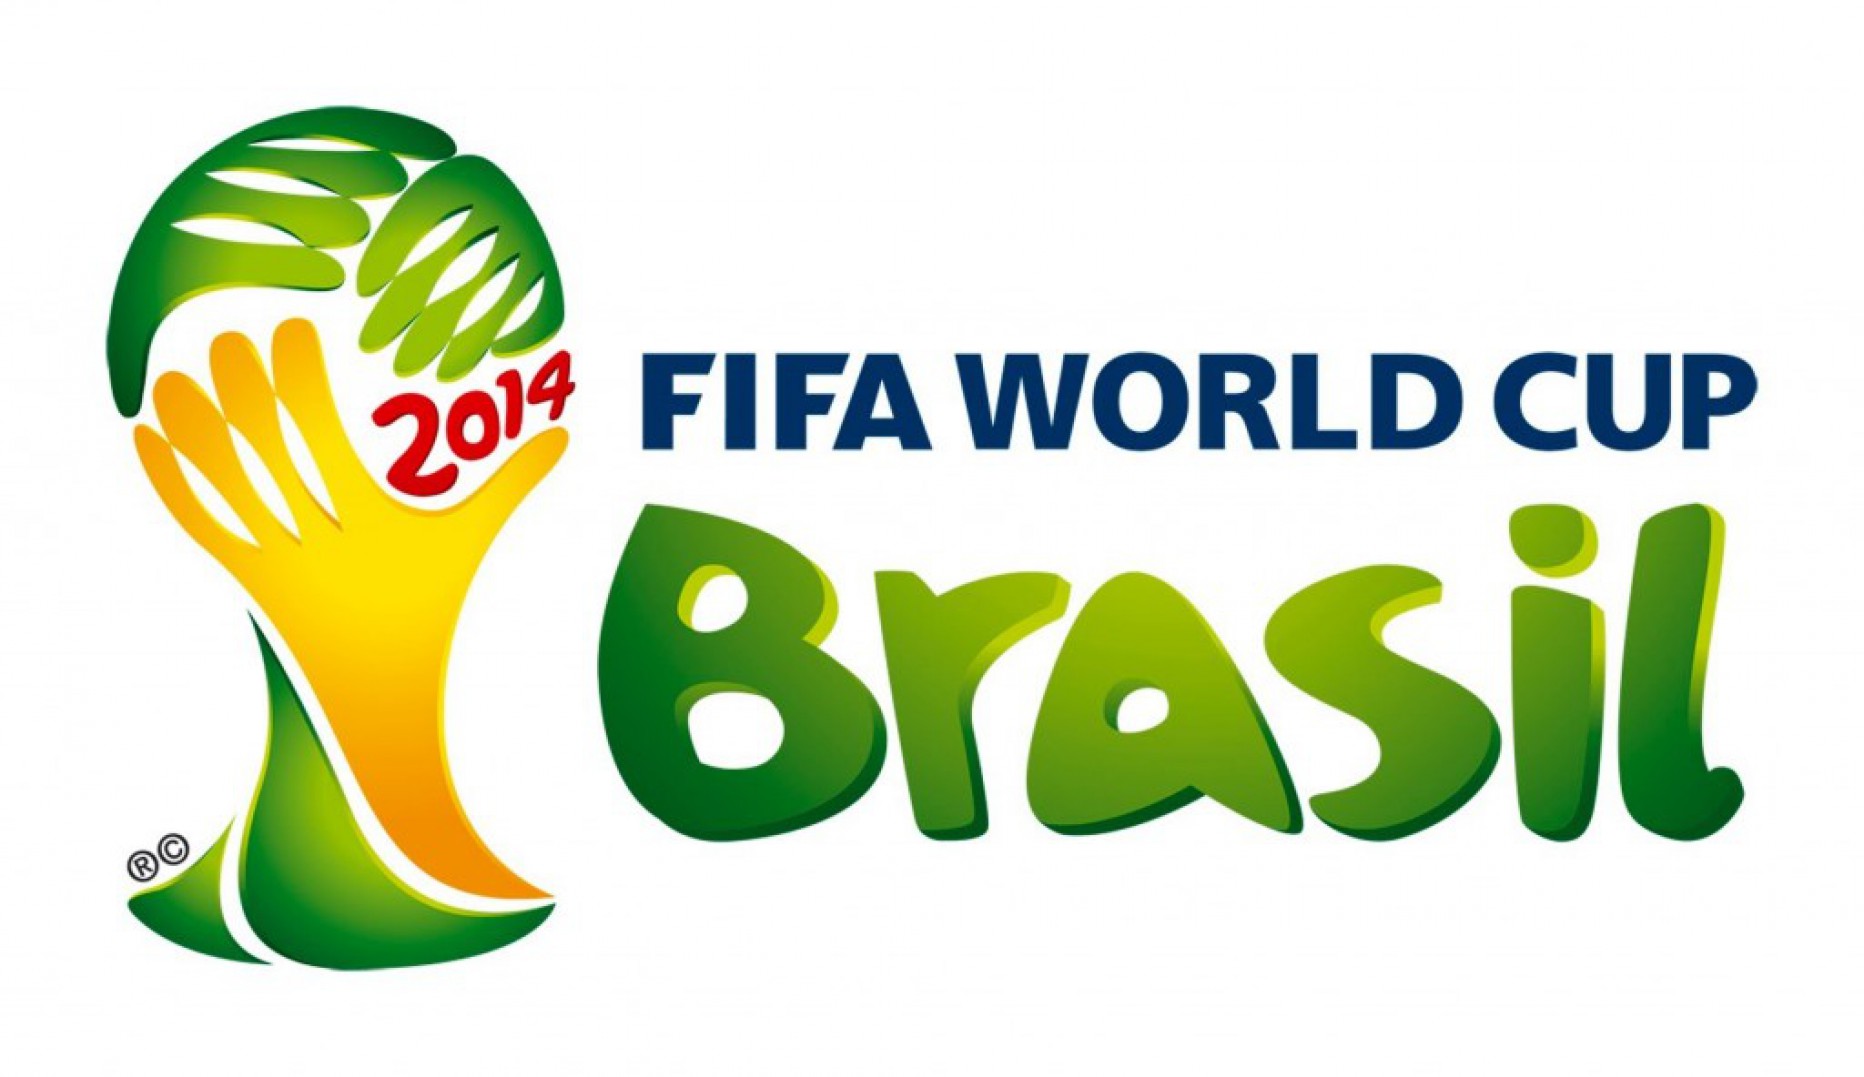 Fifaworldcup2014